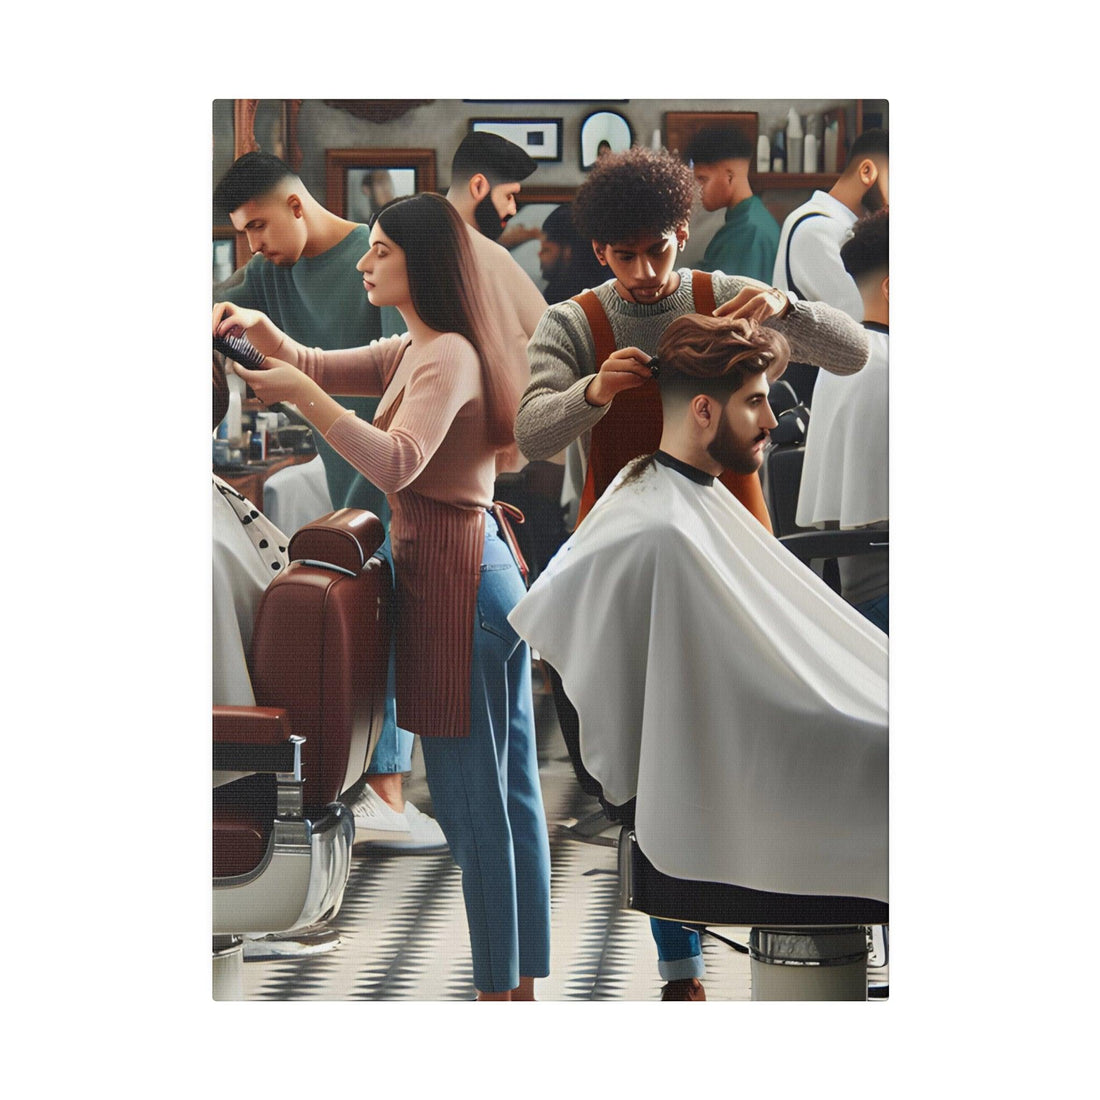 "Clip & Trim: Capturing the Soul of the Barber Shop Canvas Wall Art" - The Alice Gallery